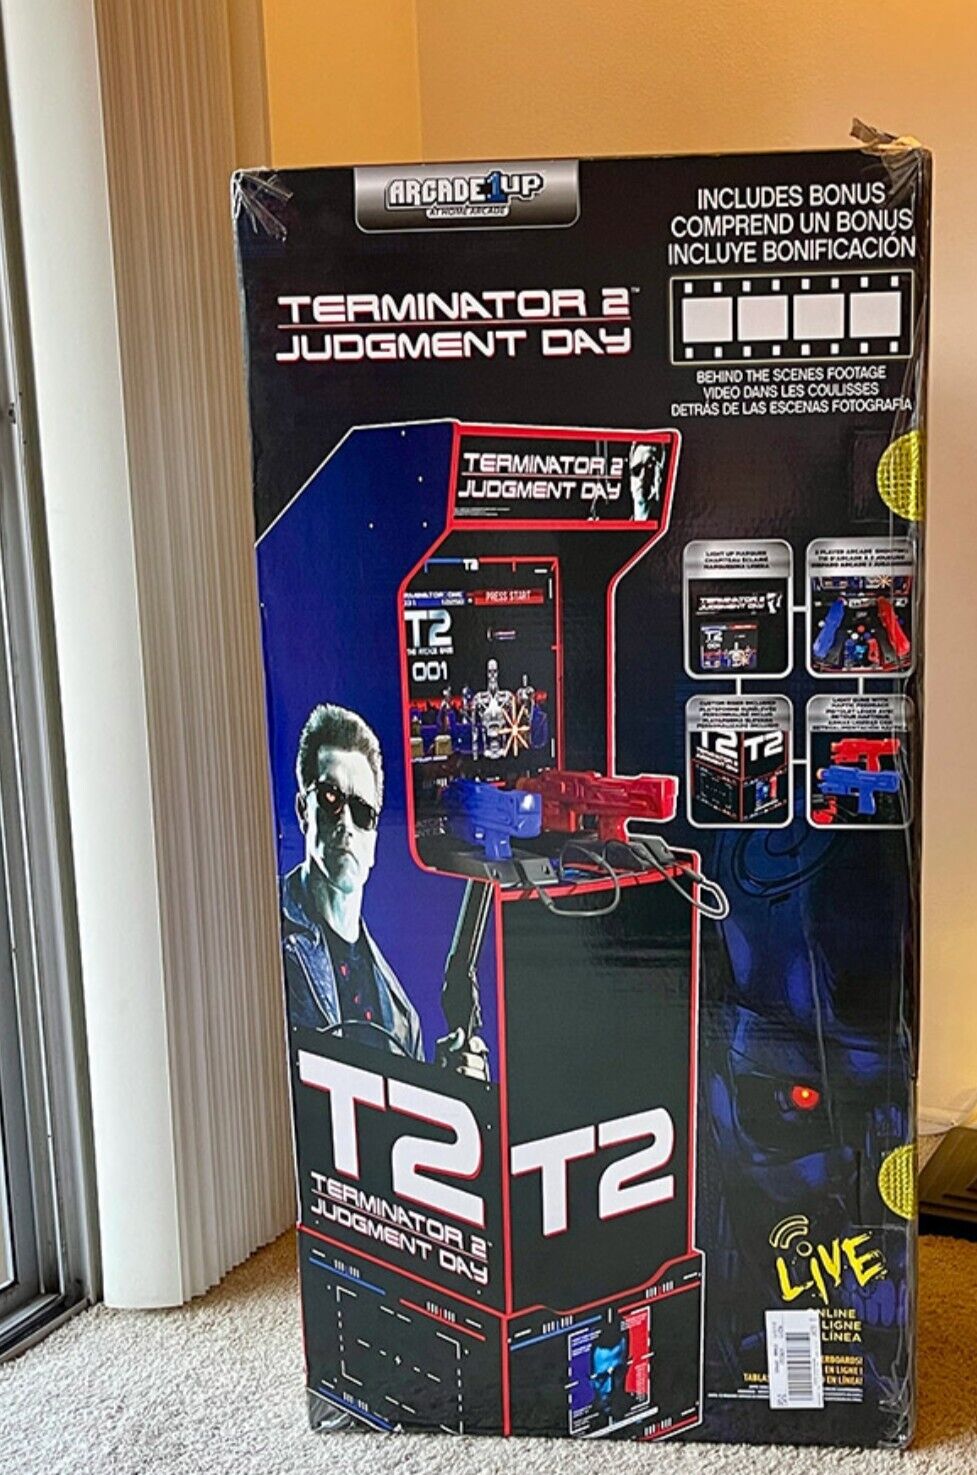 (NEW IN BOX) Arcade1UP Terminator 2 Judgment Day w Riser and Lit Marquee + WIFI